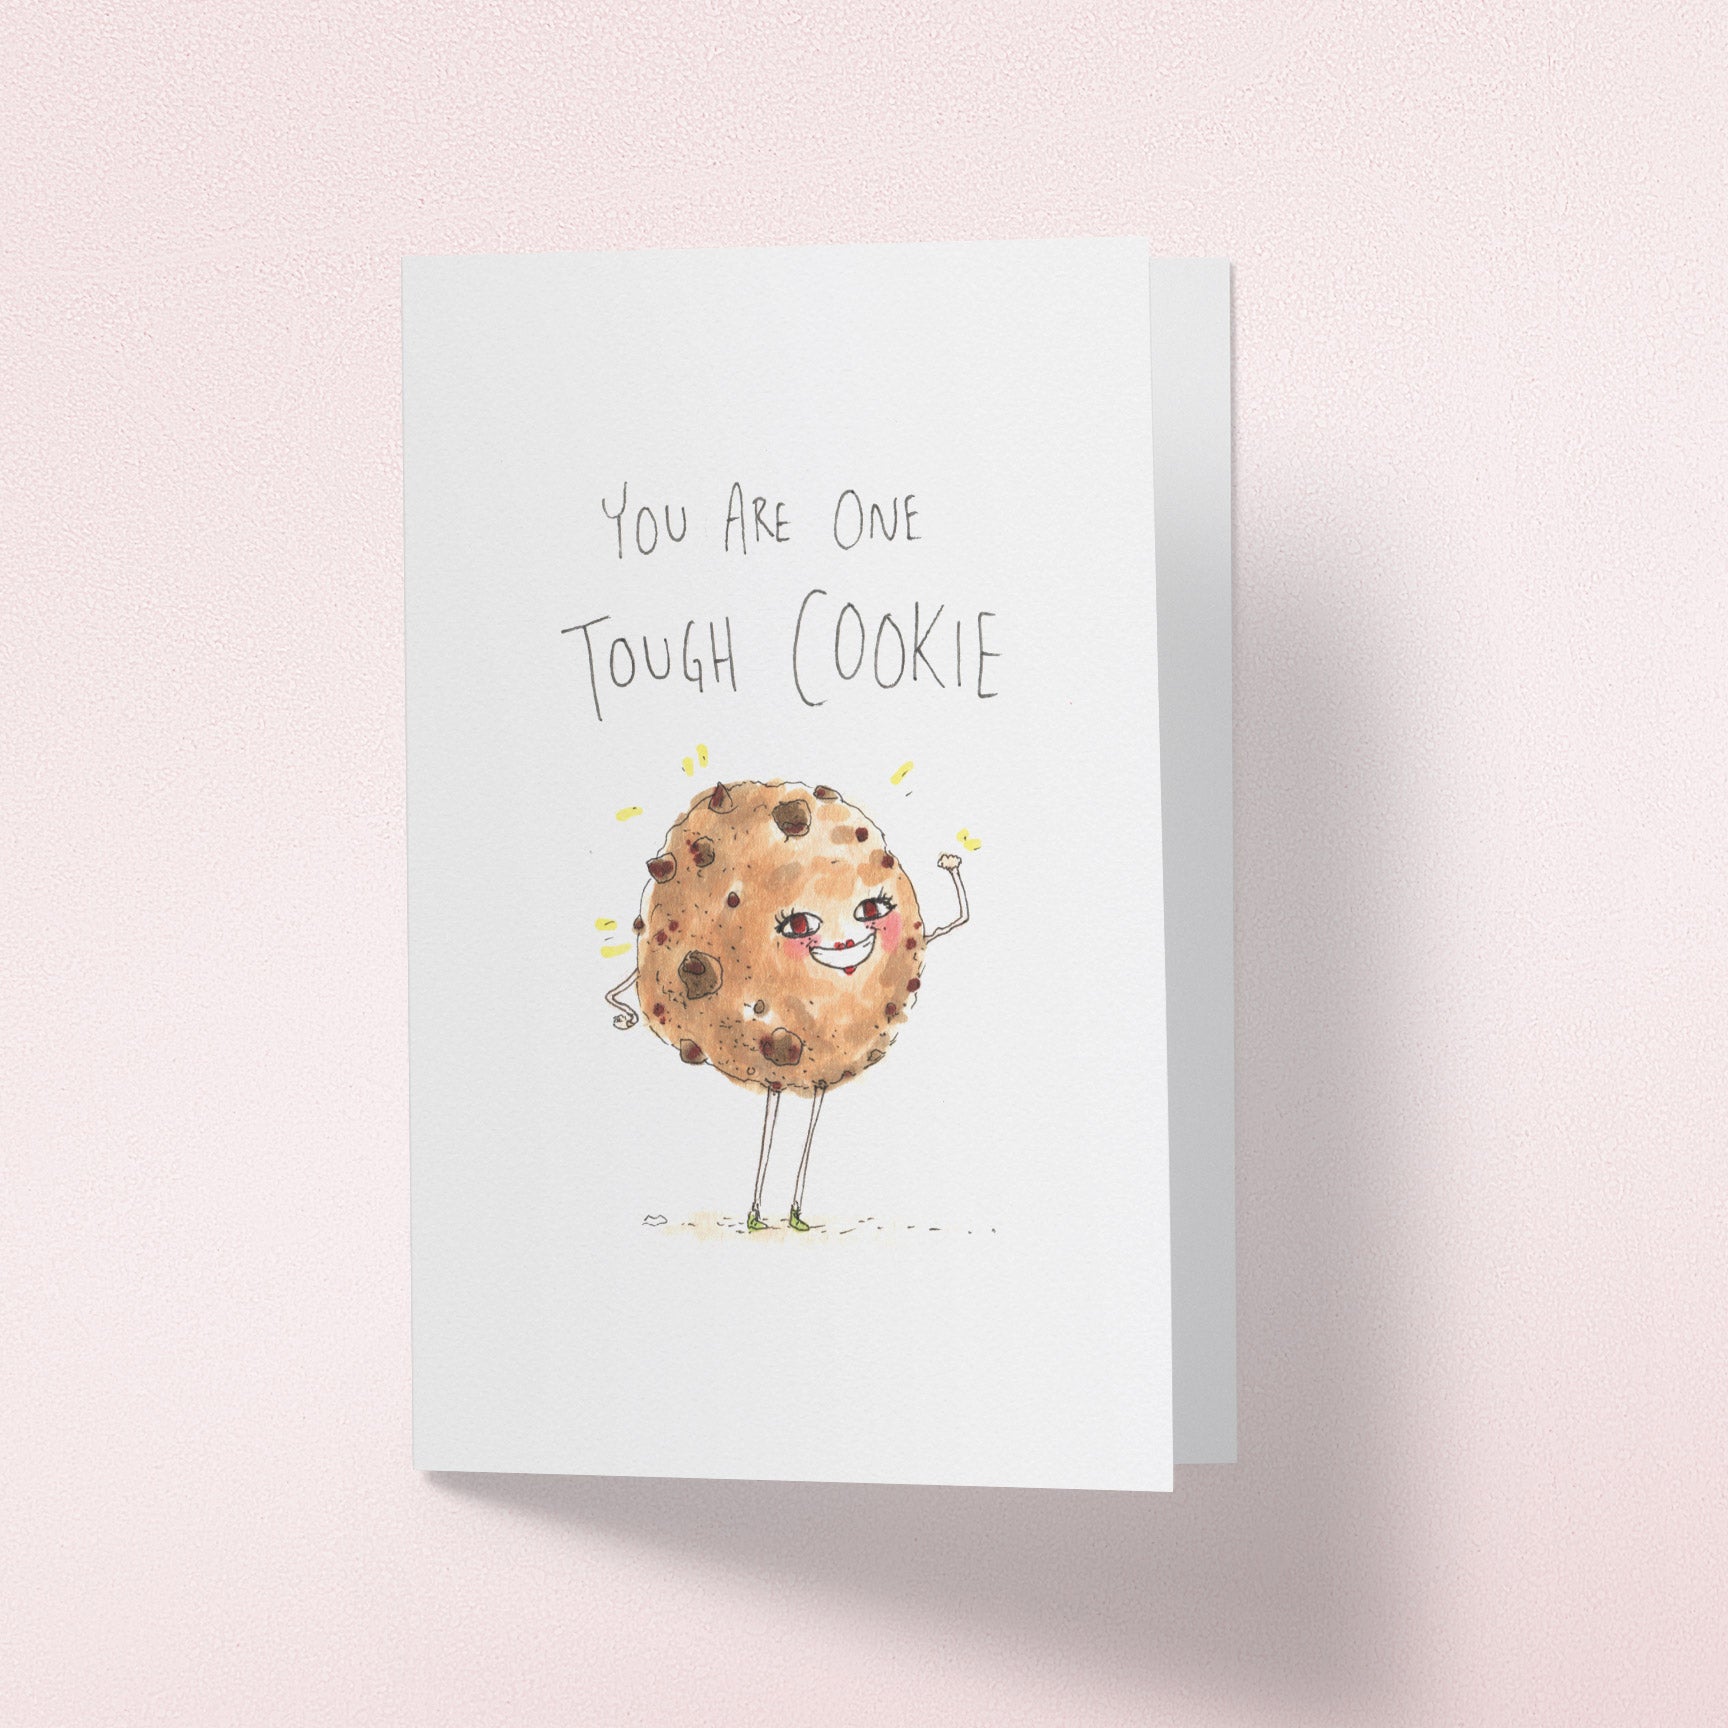 You Are One Tough Cookie - Well Drawn